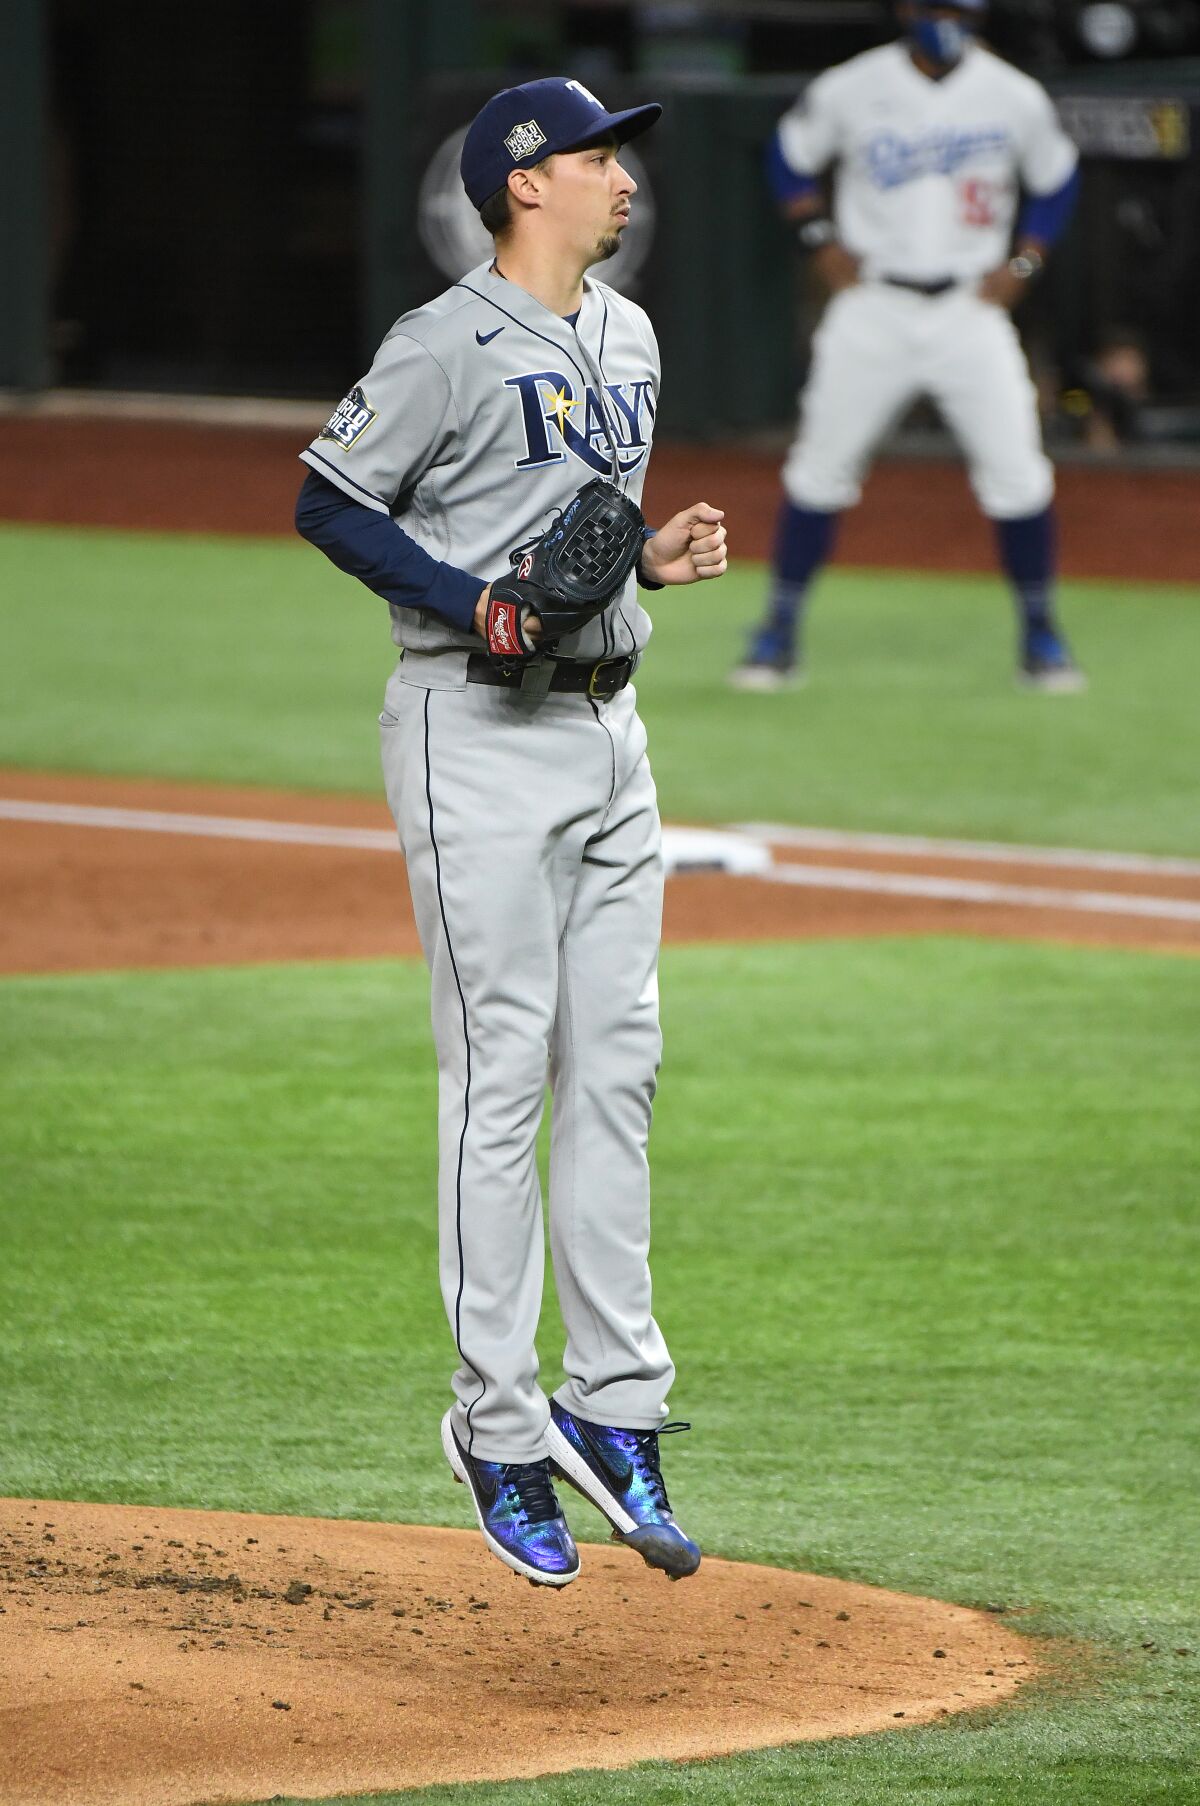 Rays pitcher Blake Snell jumps off the mound after just missing a strike call during the first inning.